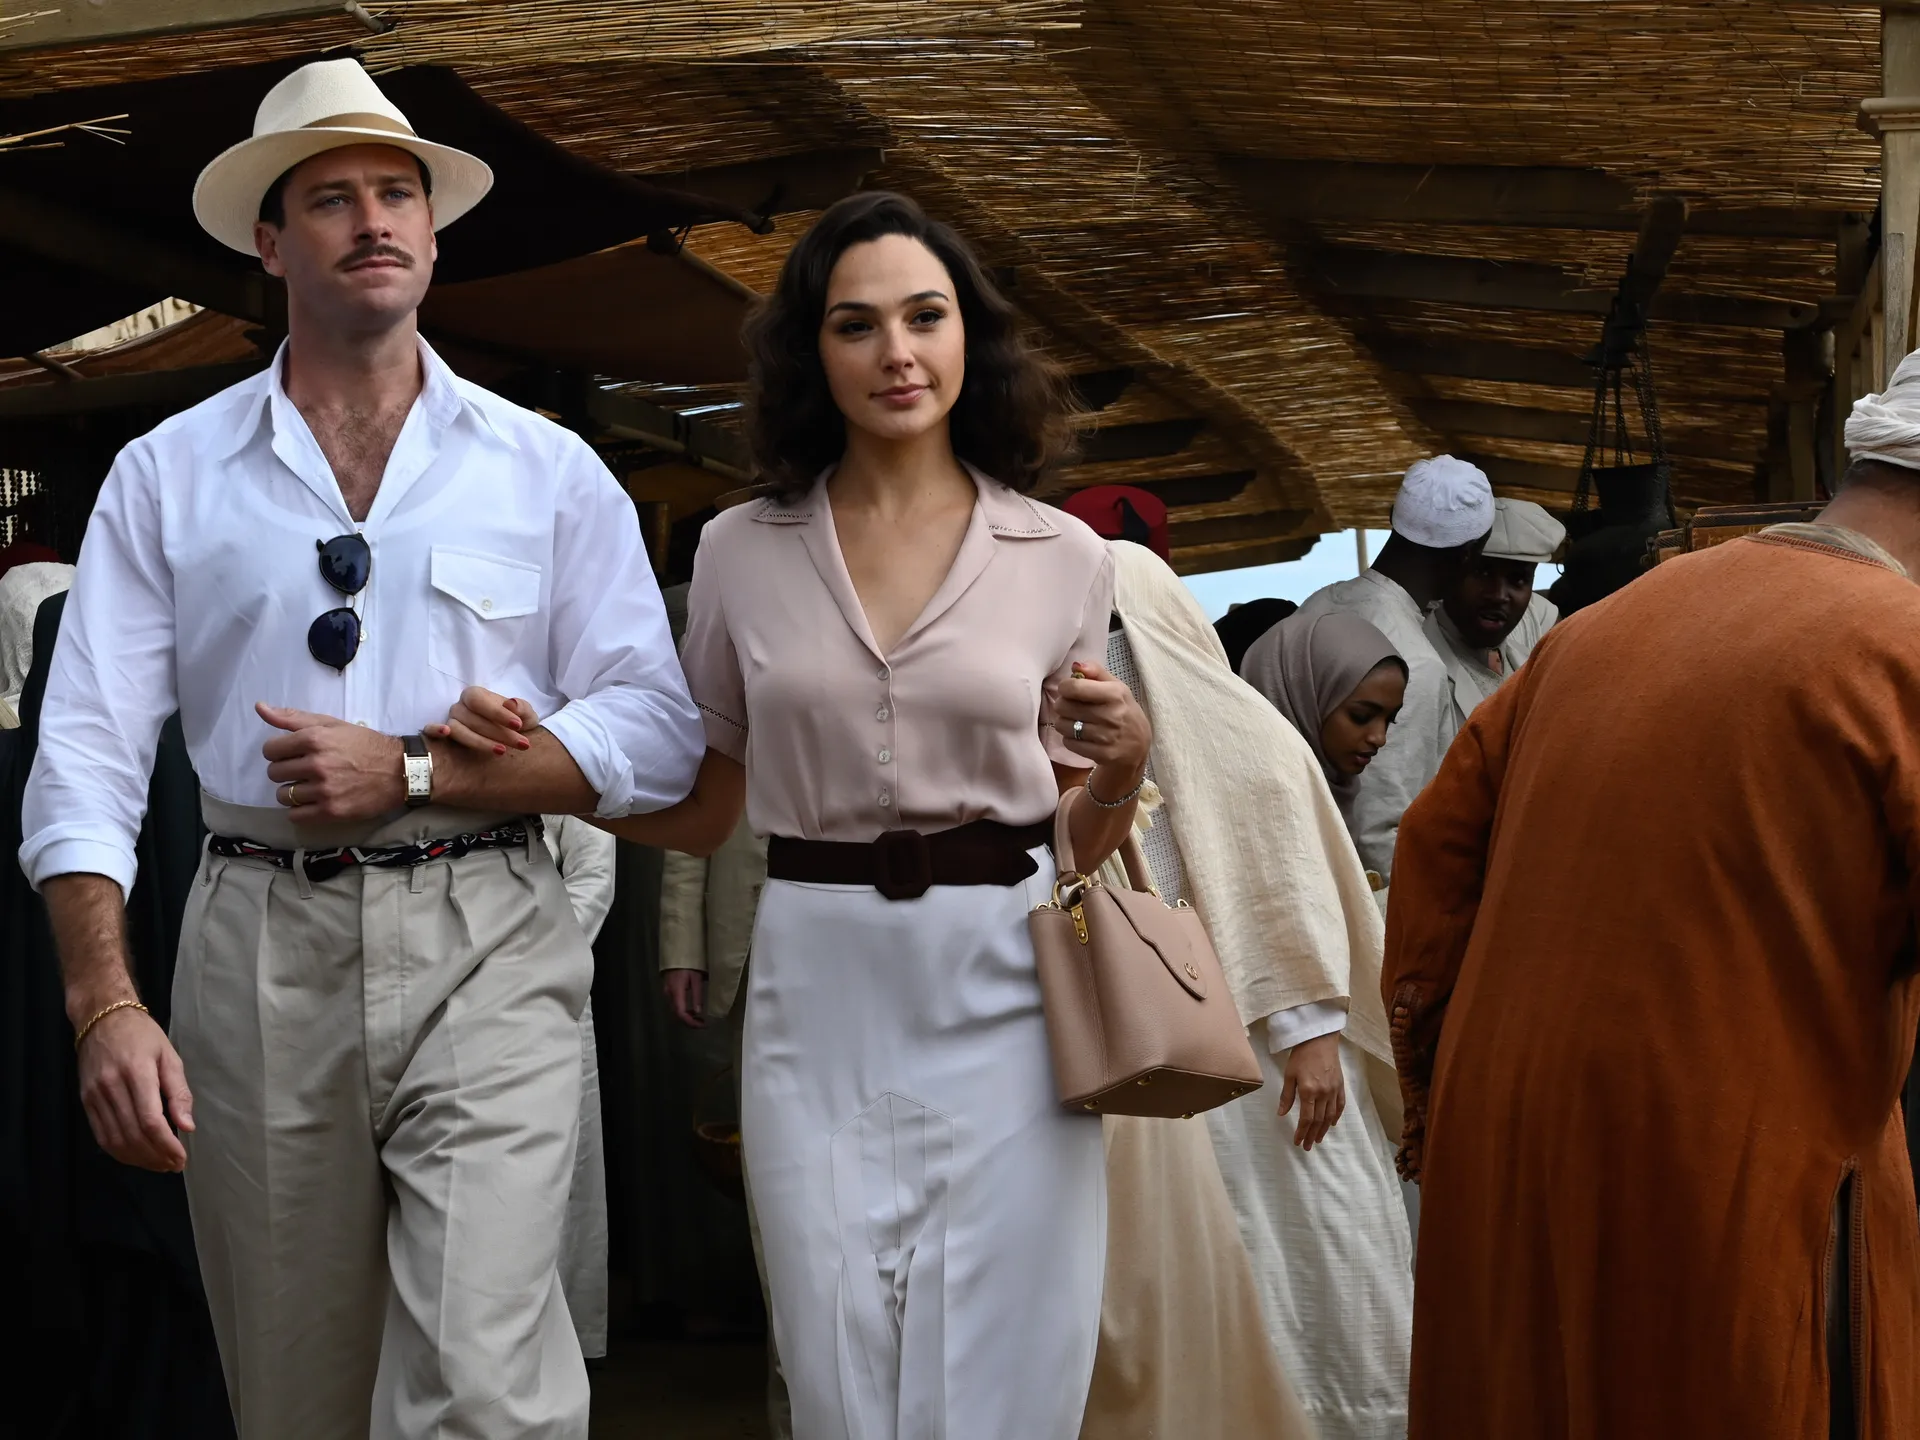 Death on the Nile is a good old-fashioned mess of a movie